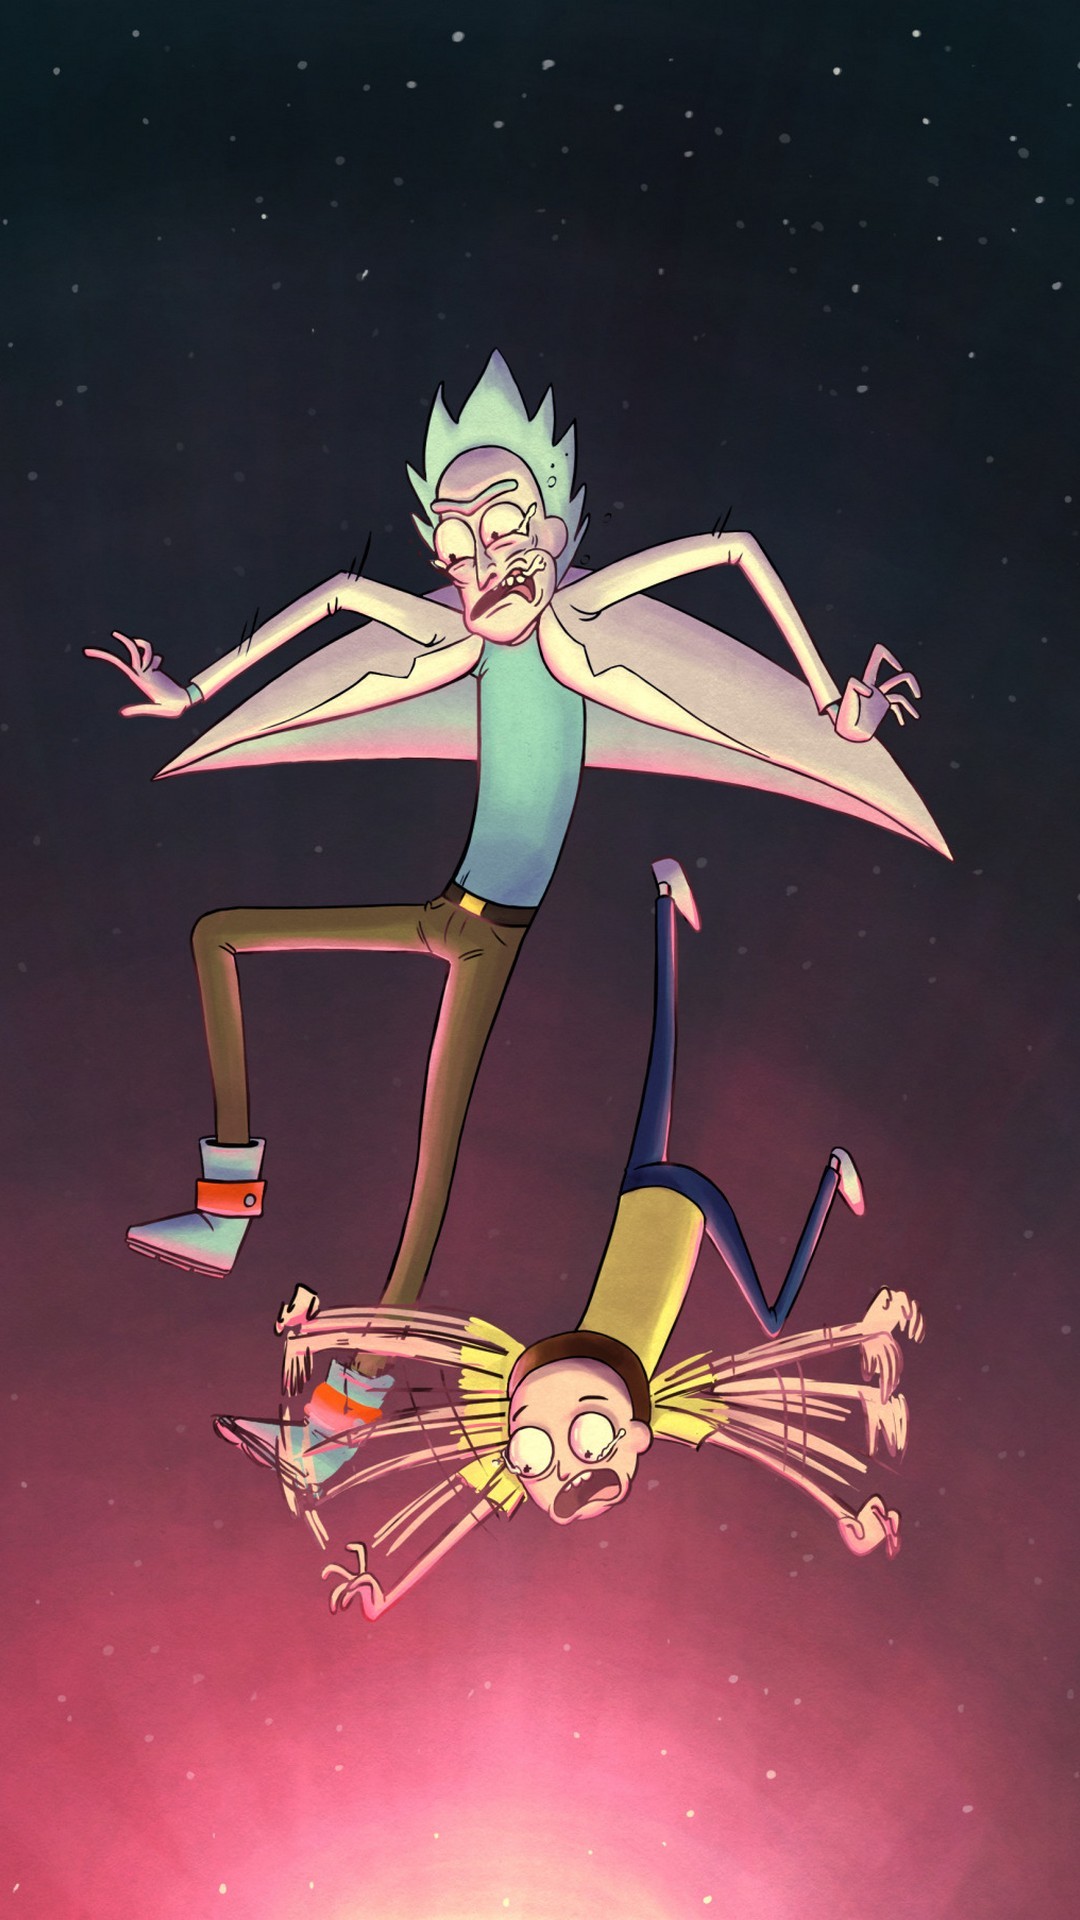 Rick and Morty HD Wallpaper For iPhone with image resolution 1080x1920 pixel. You can use this wallpaper as background for your desktop Computer Screensavers, Android or iPhone smartphones